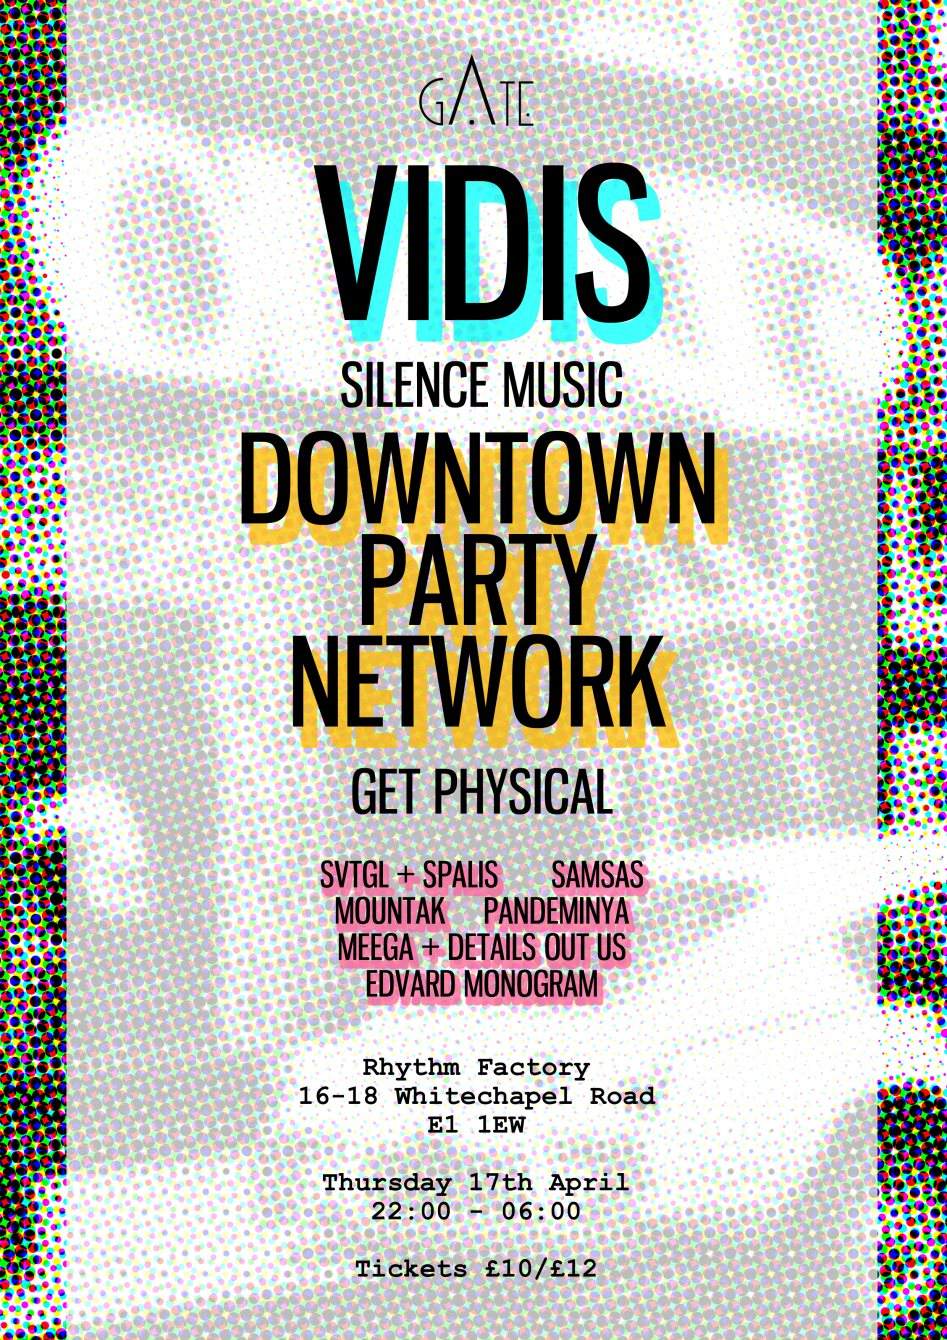 Gate l Easter Special with Vidis, Downtown Party Network - Página frontal